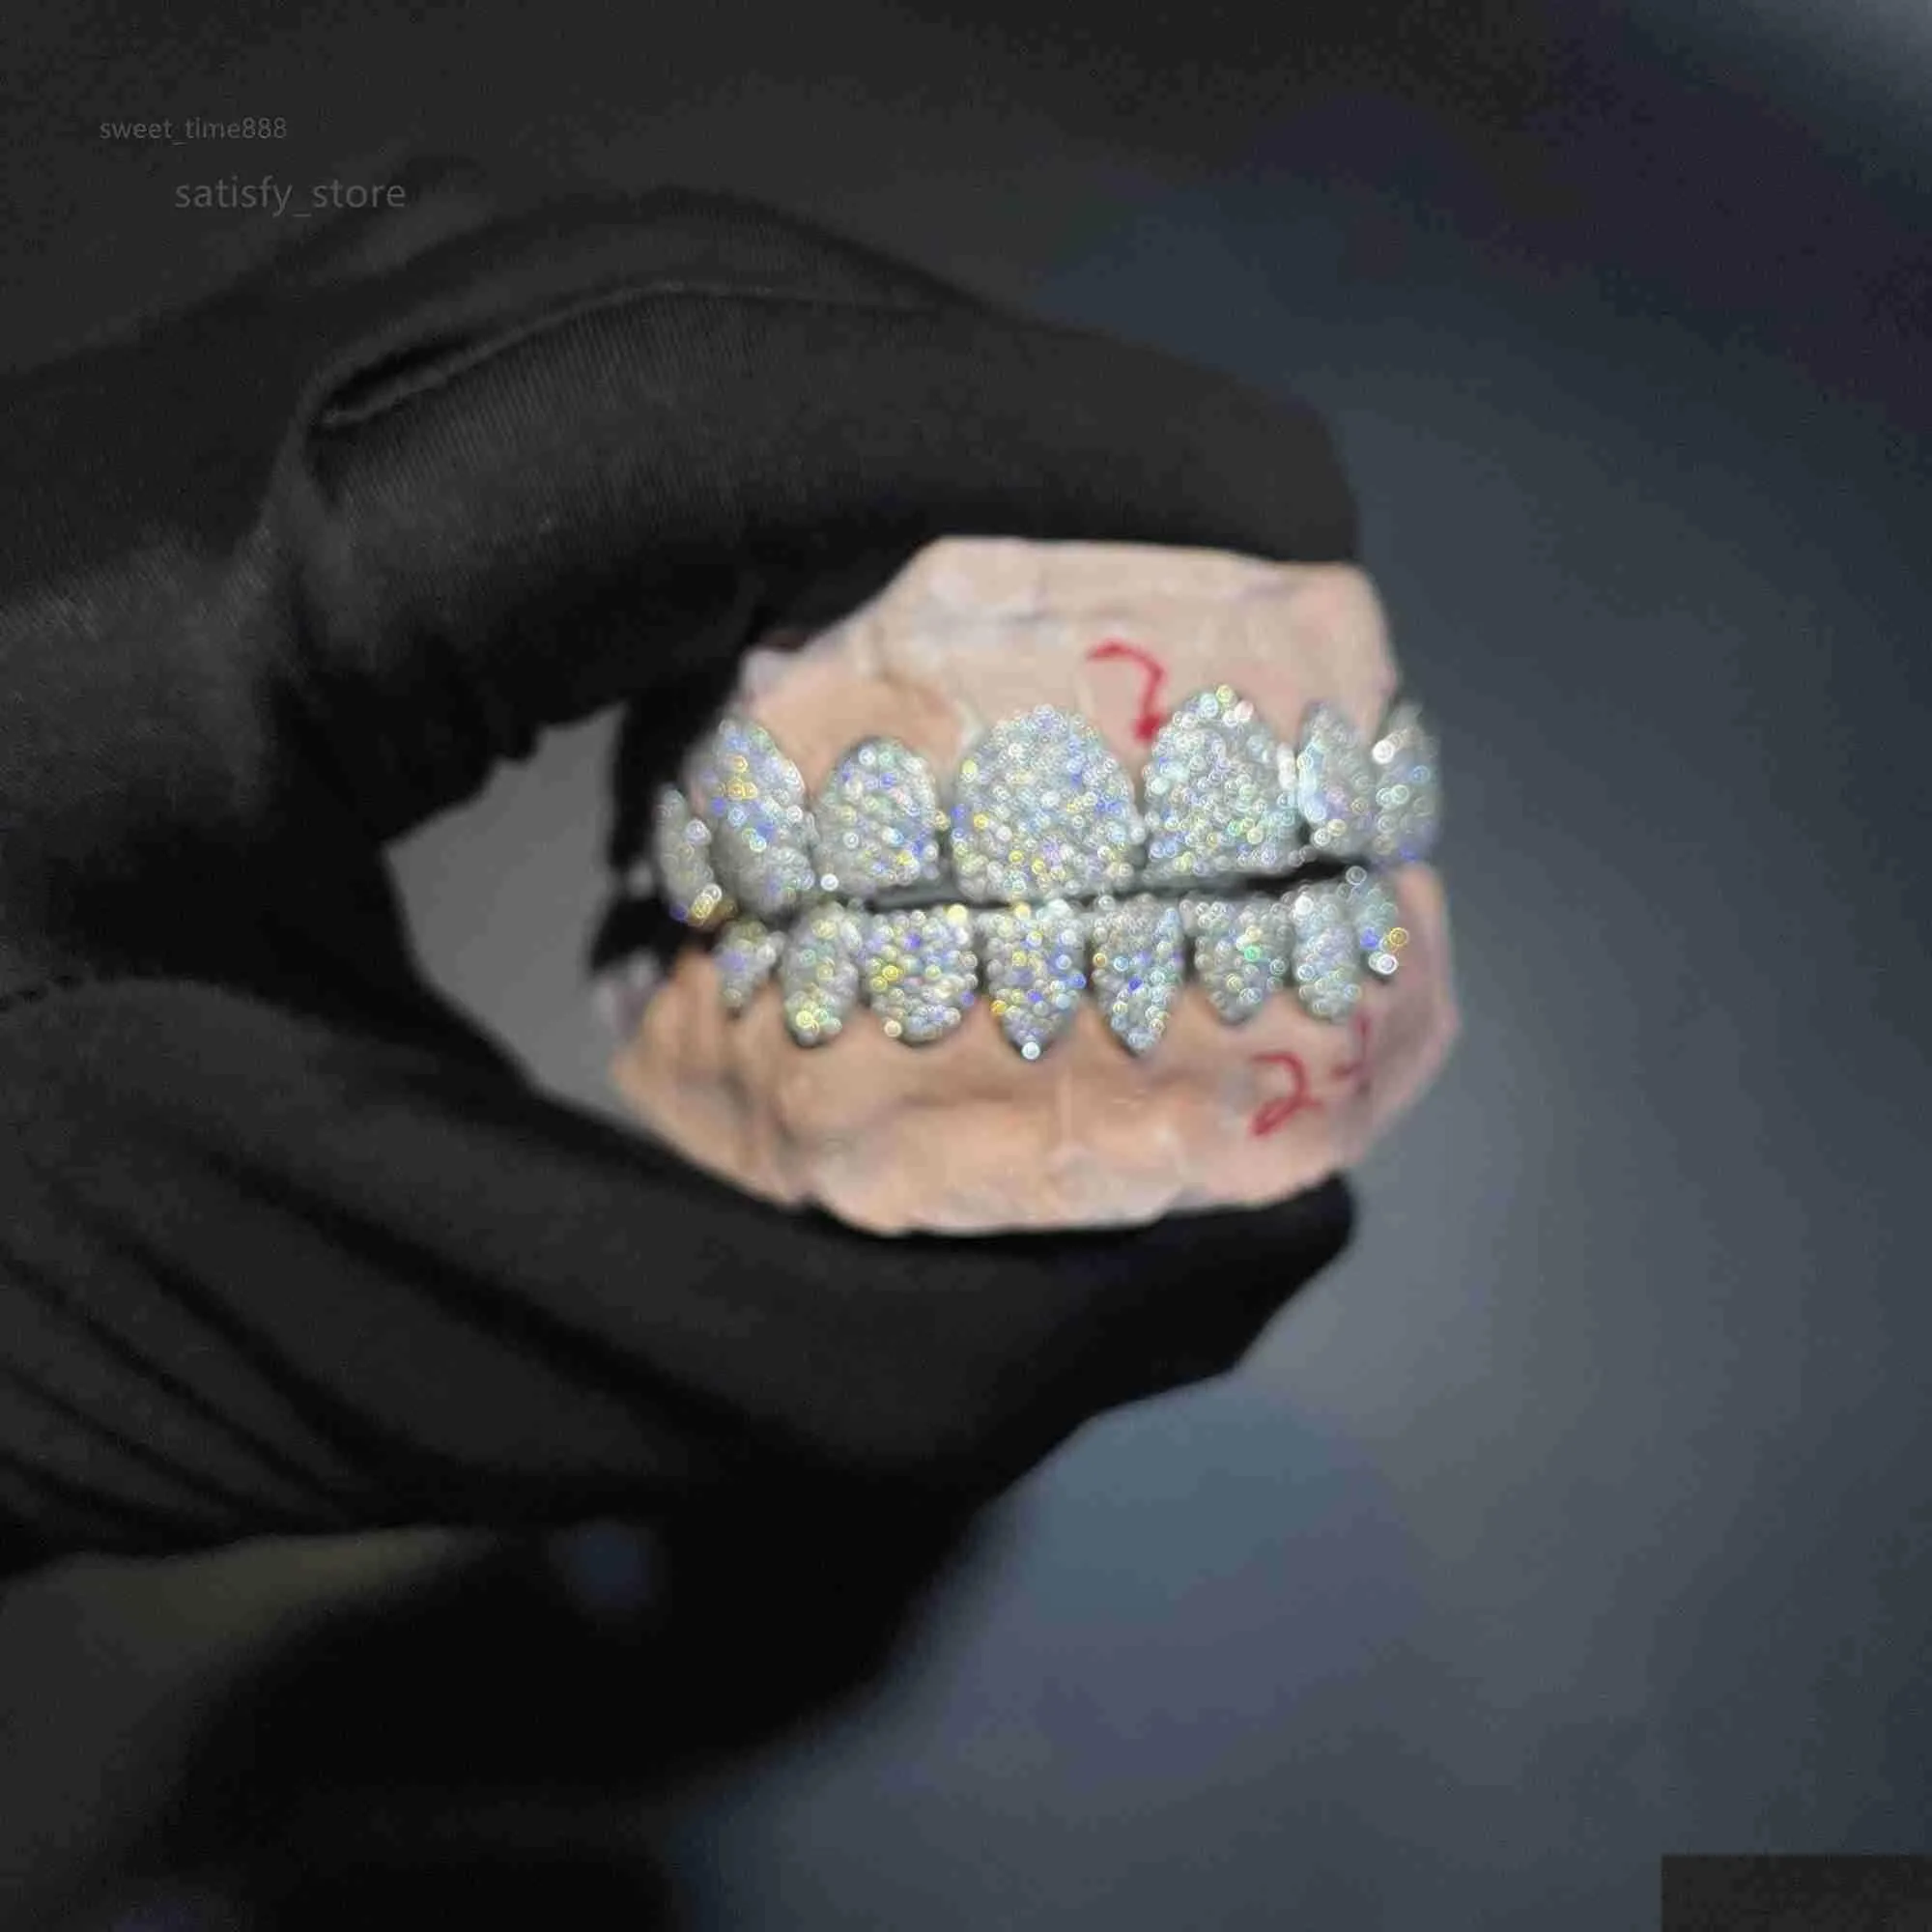 custom made dental grills iced out sterling silver real gold jewelry zigzag setting vvs moissanite diamonds teeth grillz